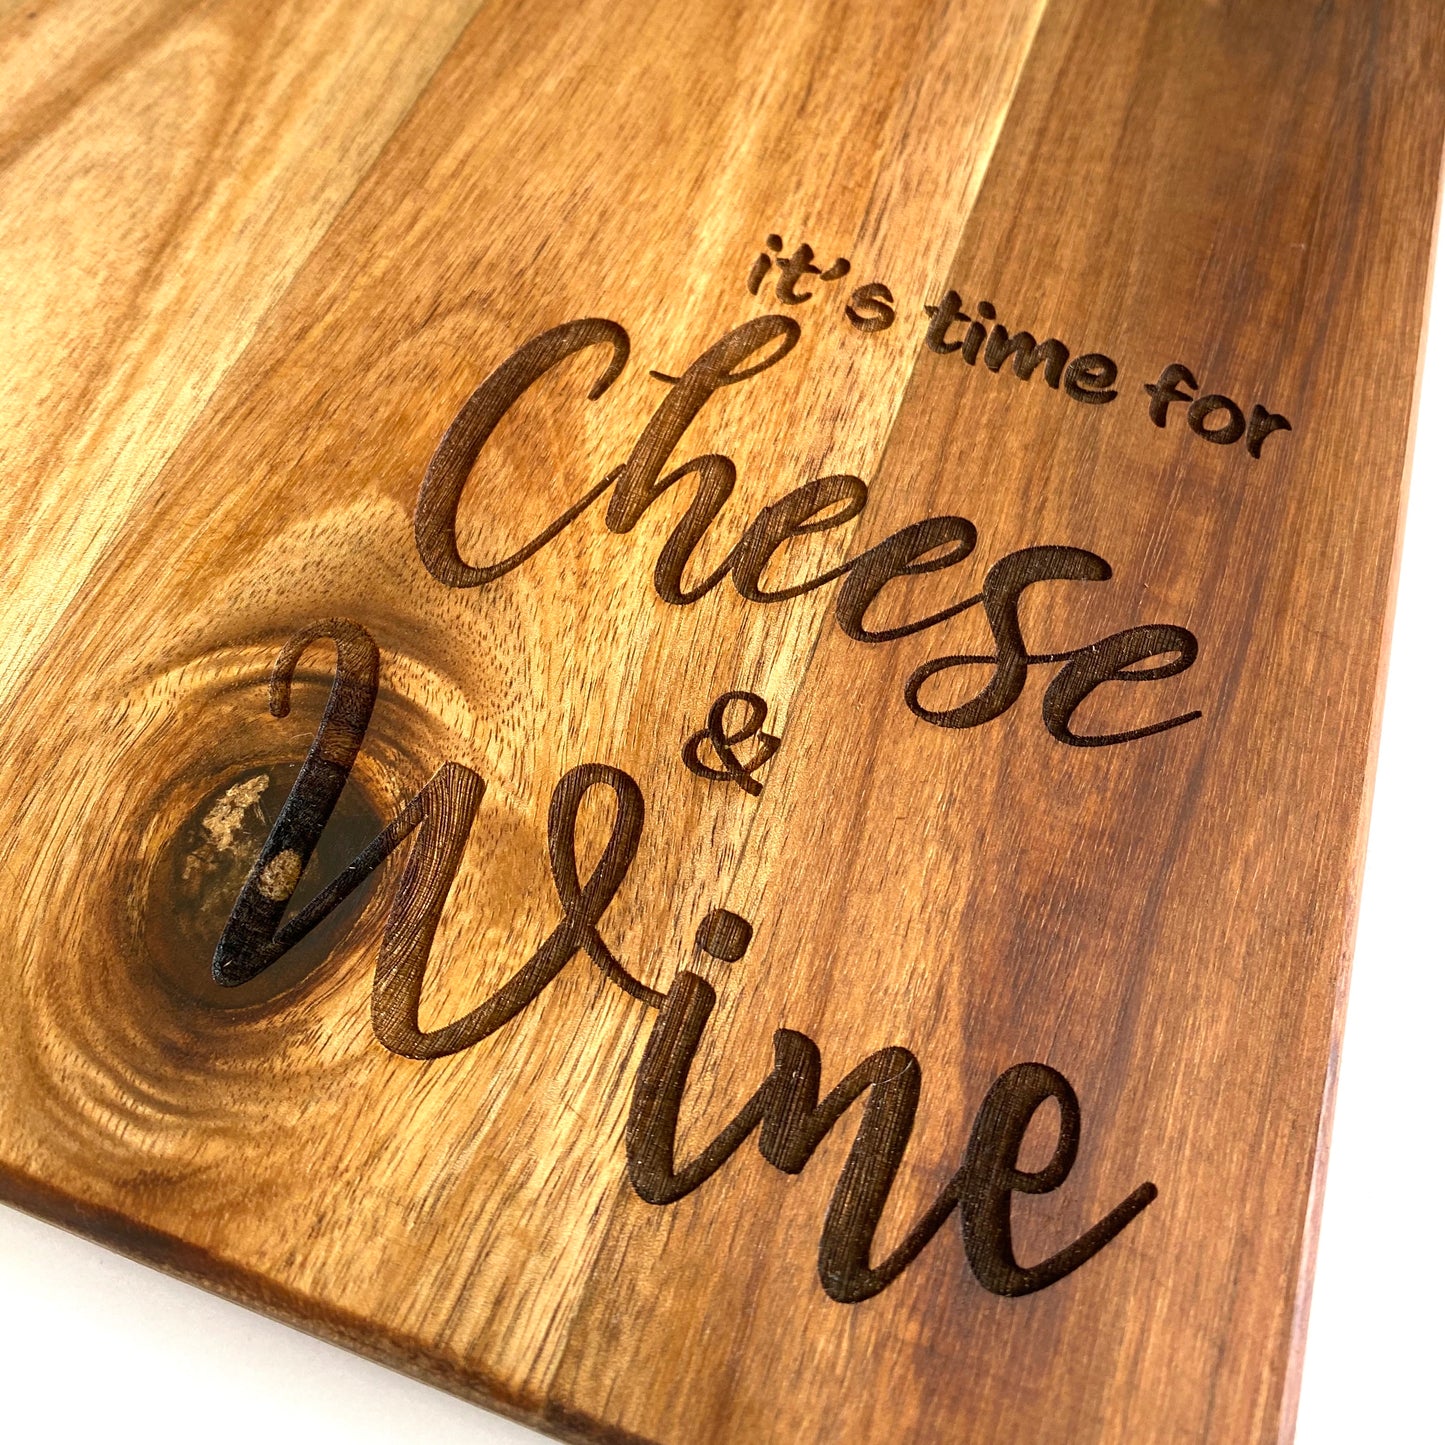 It’s time for cheese and wine - Younique Collective